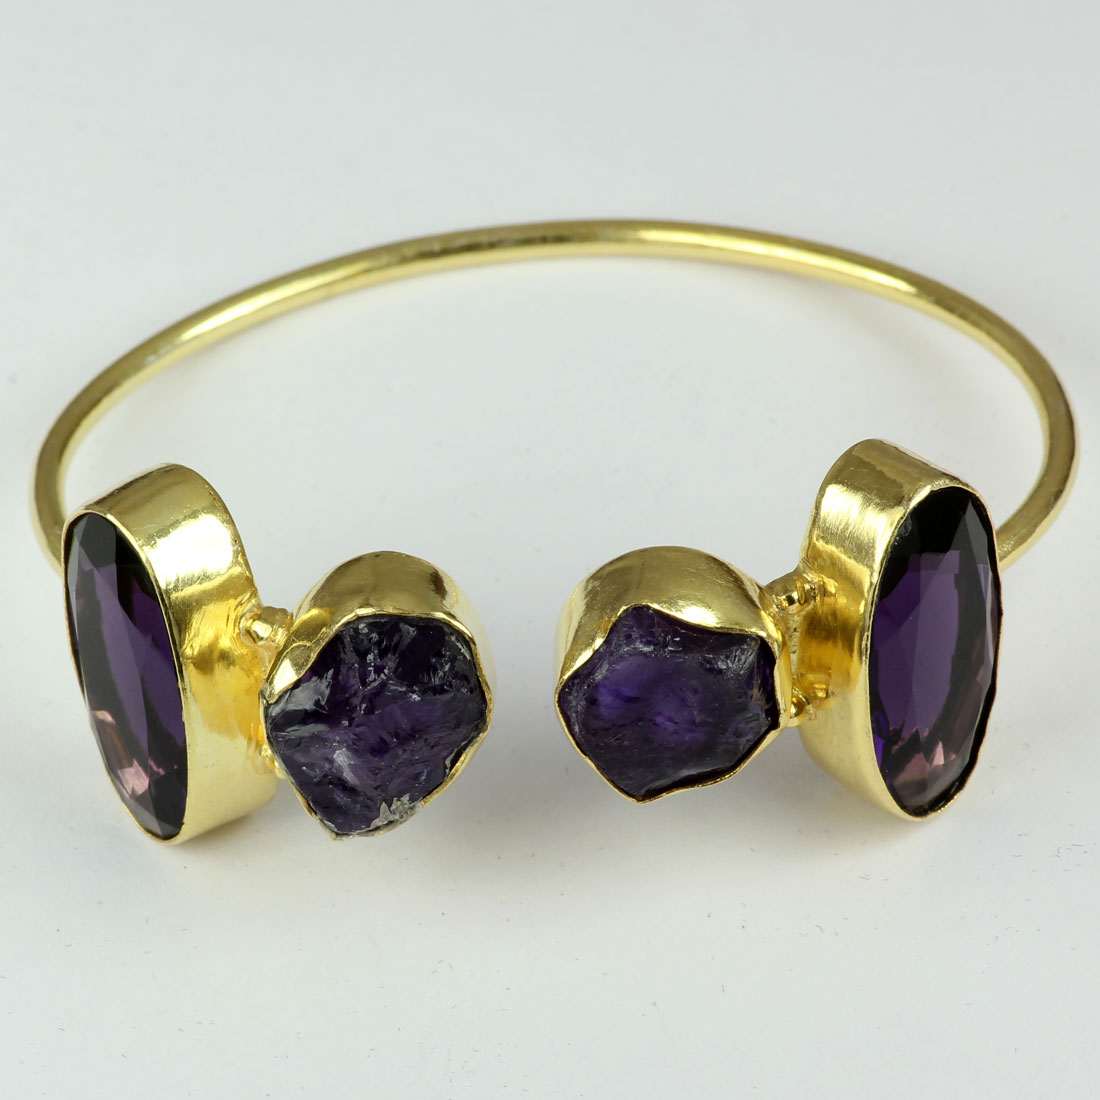 Amethyst Cut and Rough H - BN965-Fabulous Designs Mix Stones In Brass Bangles